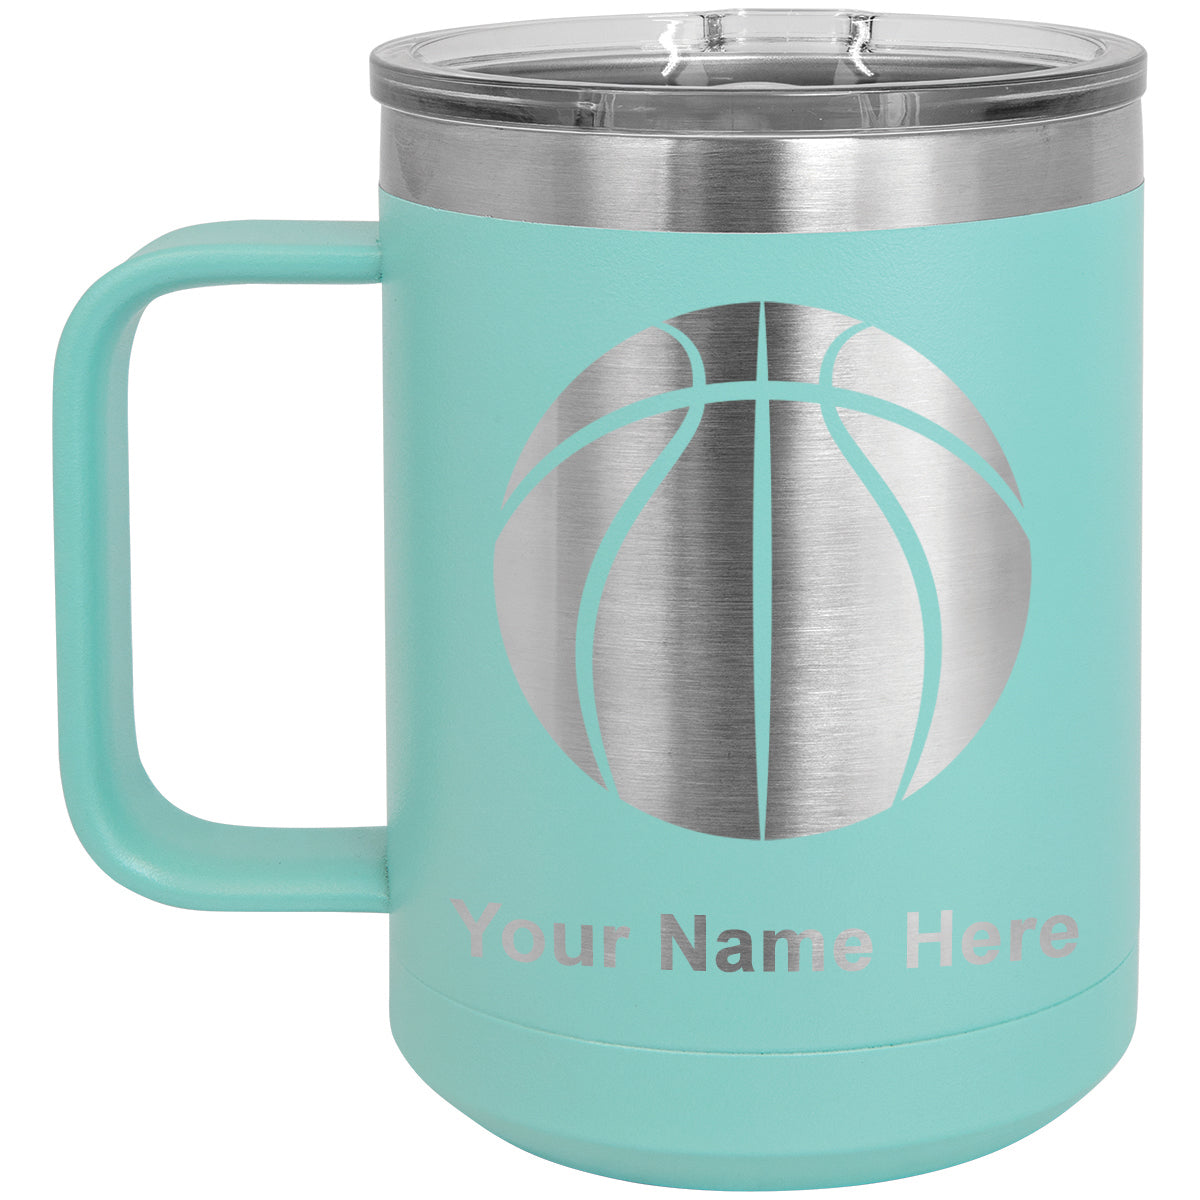 15oz Vacuum Insulated Coffee Mug, Basketball Ball, Personalized Engraving Included